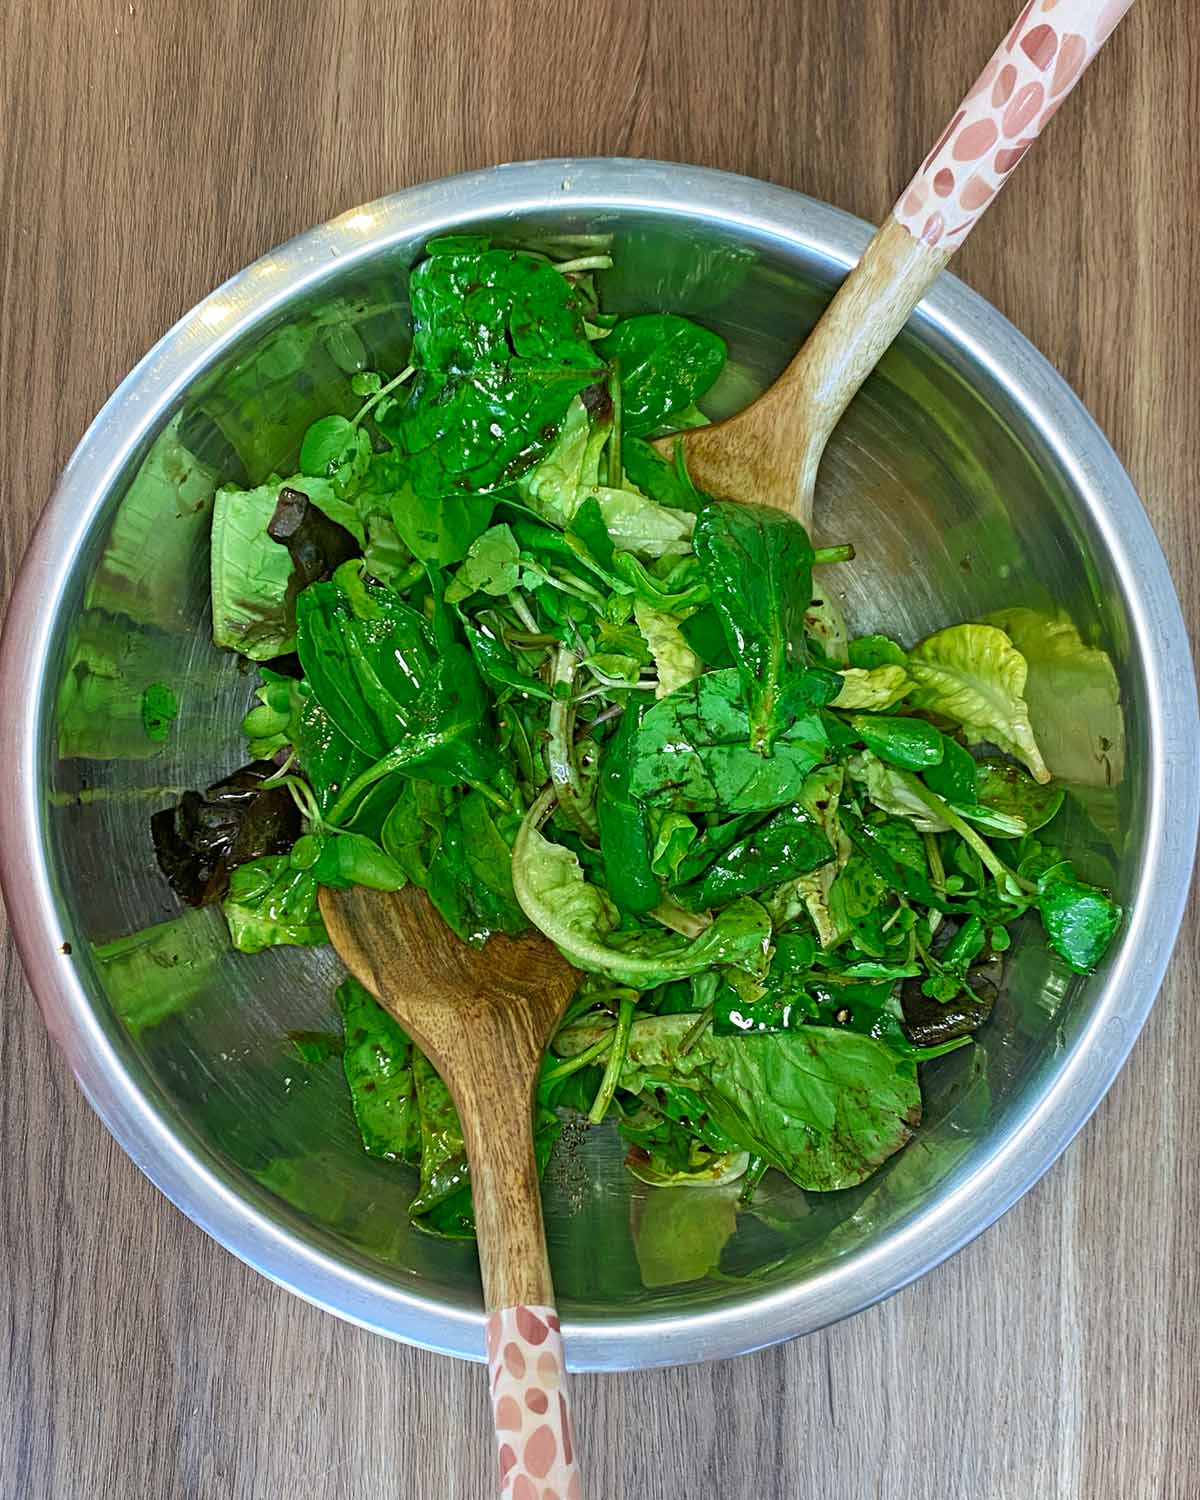 A bowl of salad leaves in an oil based dressing.